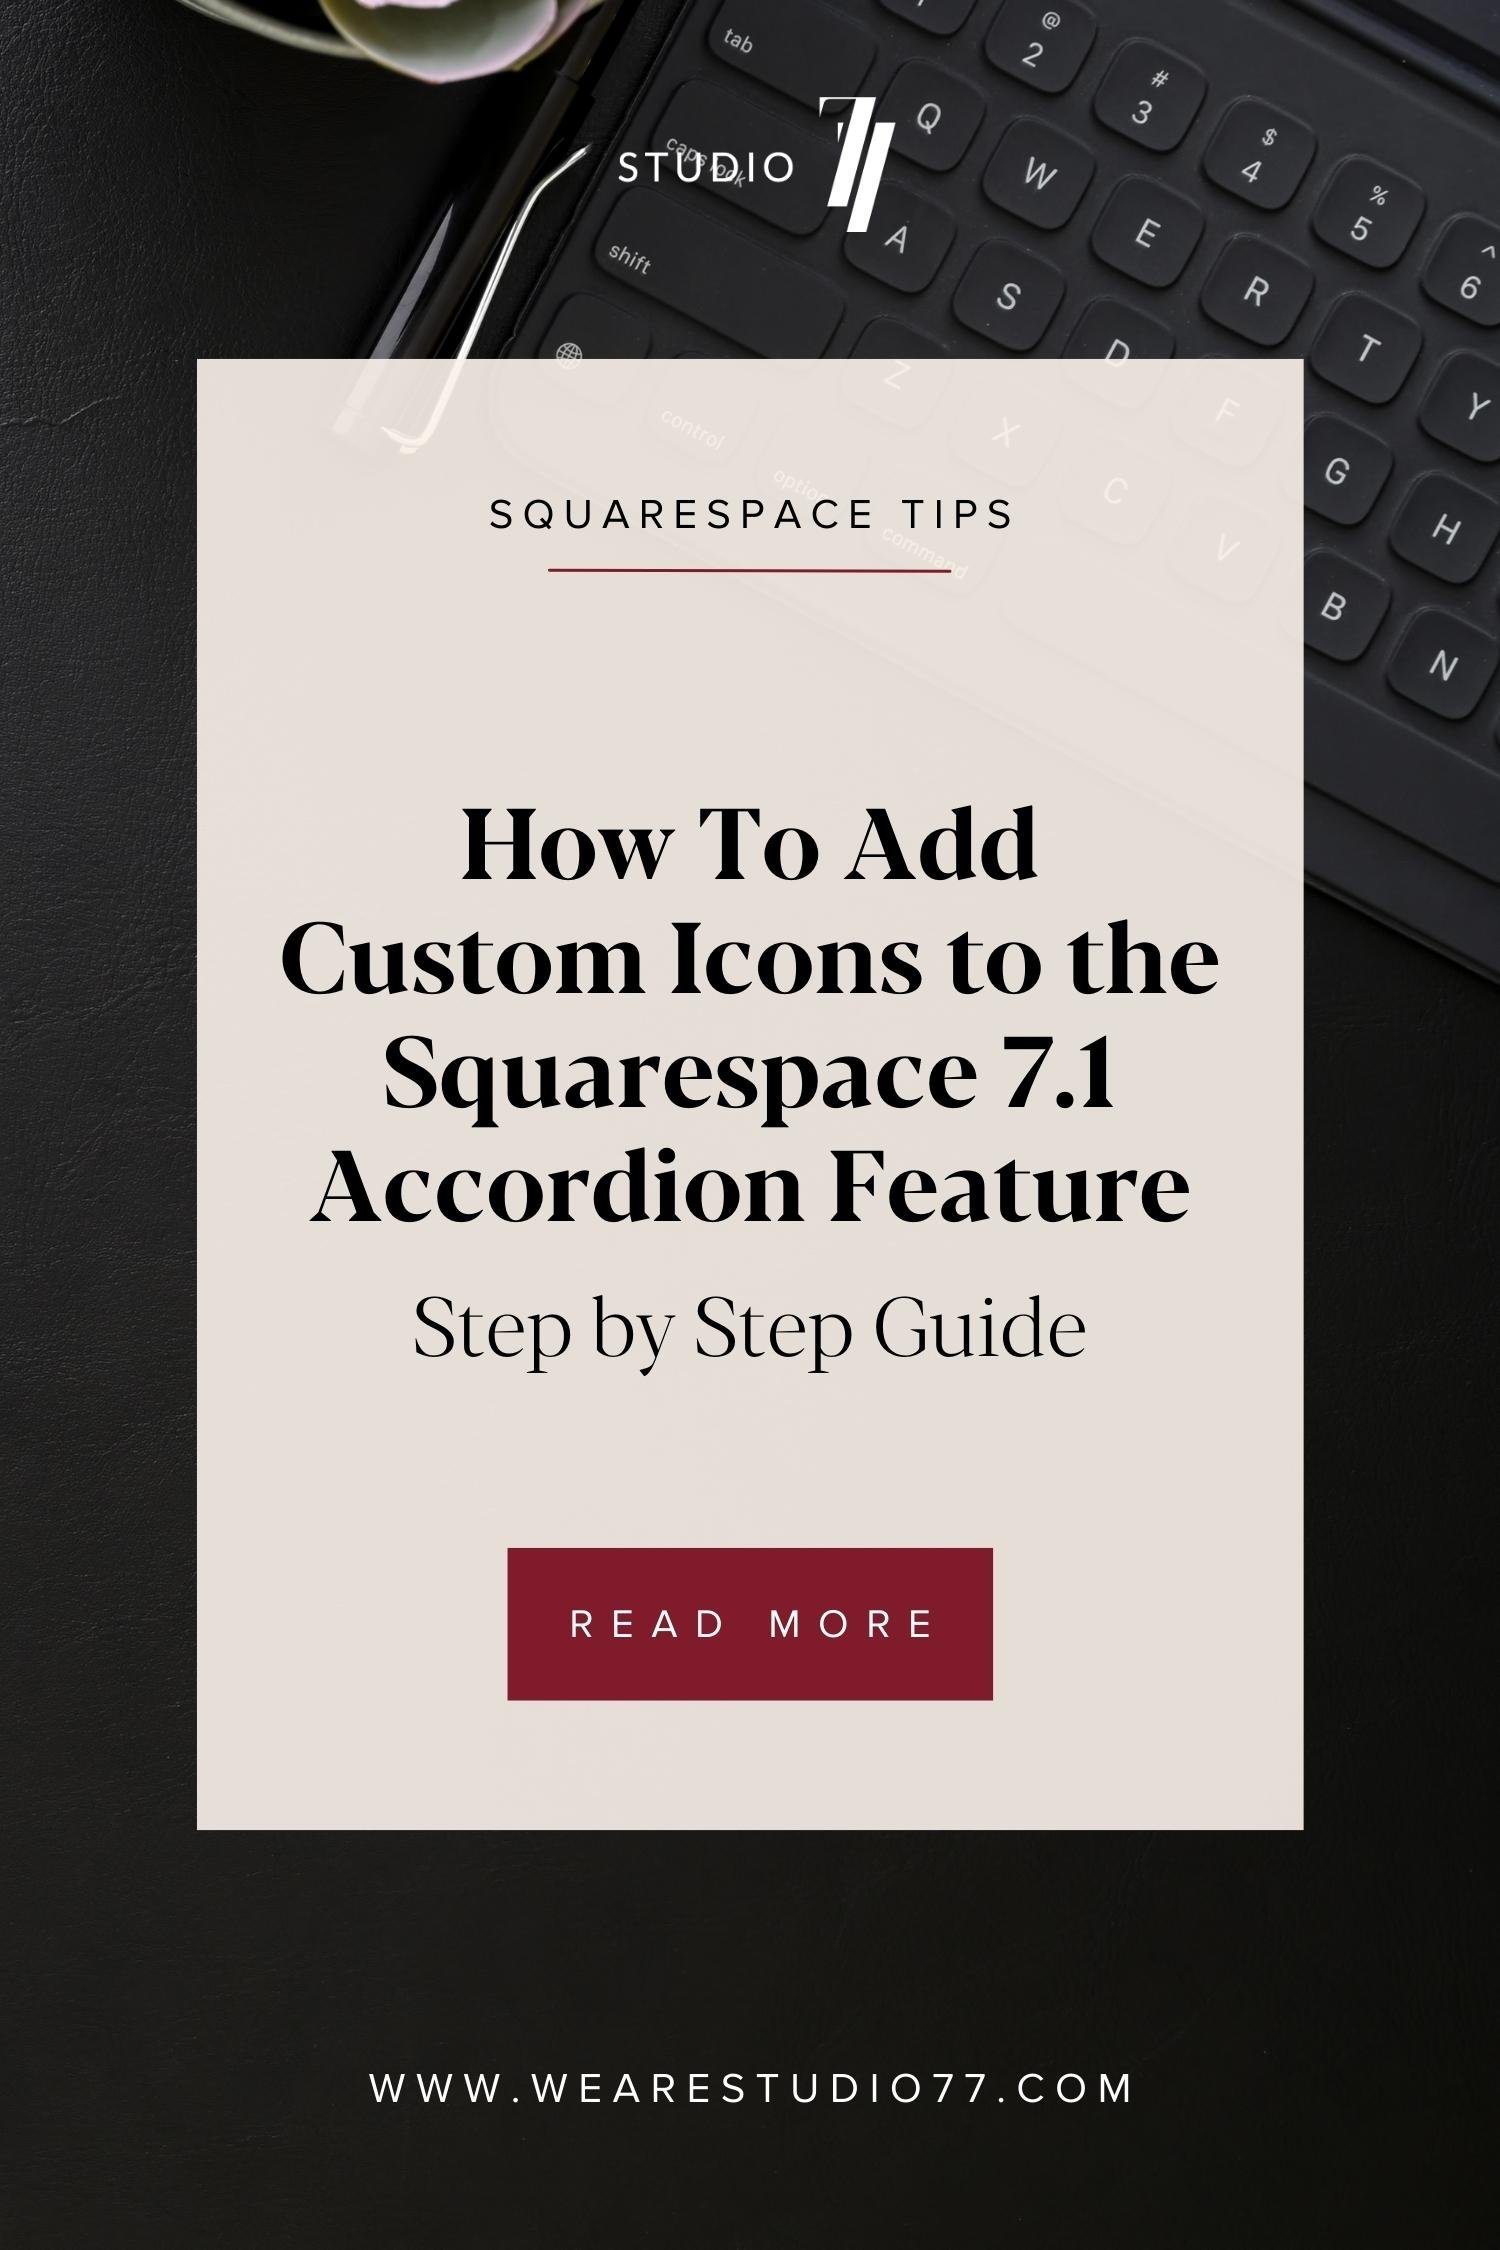 Squarespace Support UK | How To Add Custom Icons to Squarespace Accordion Feature (Copy)